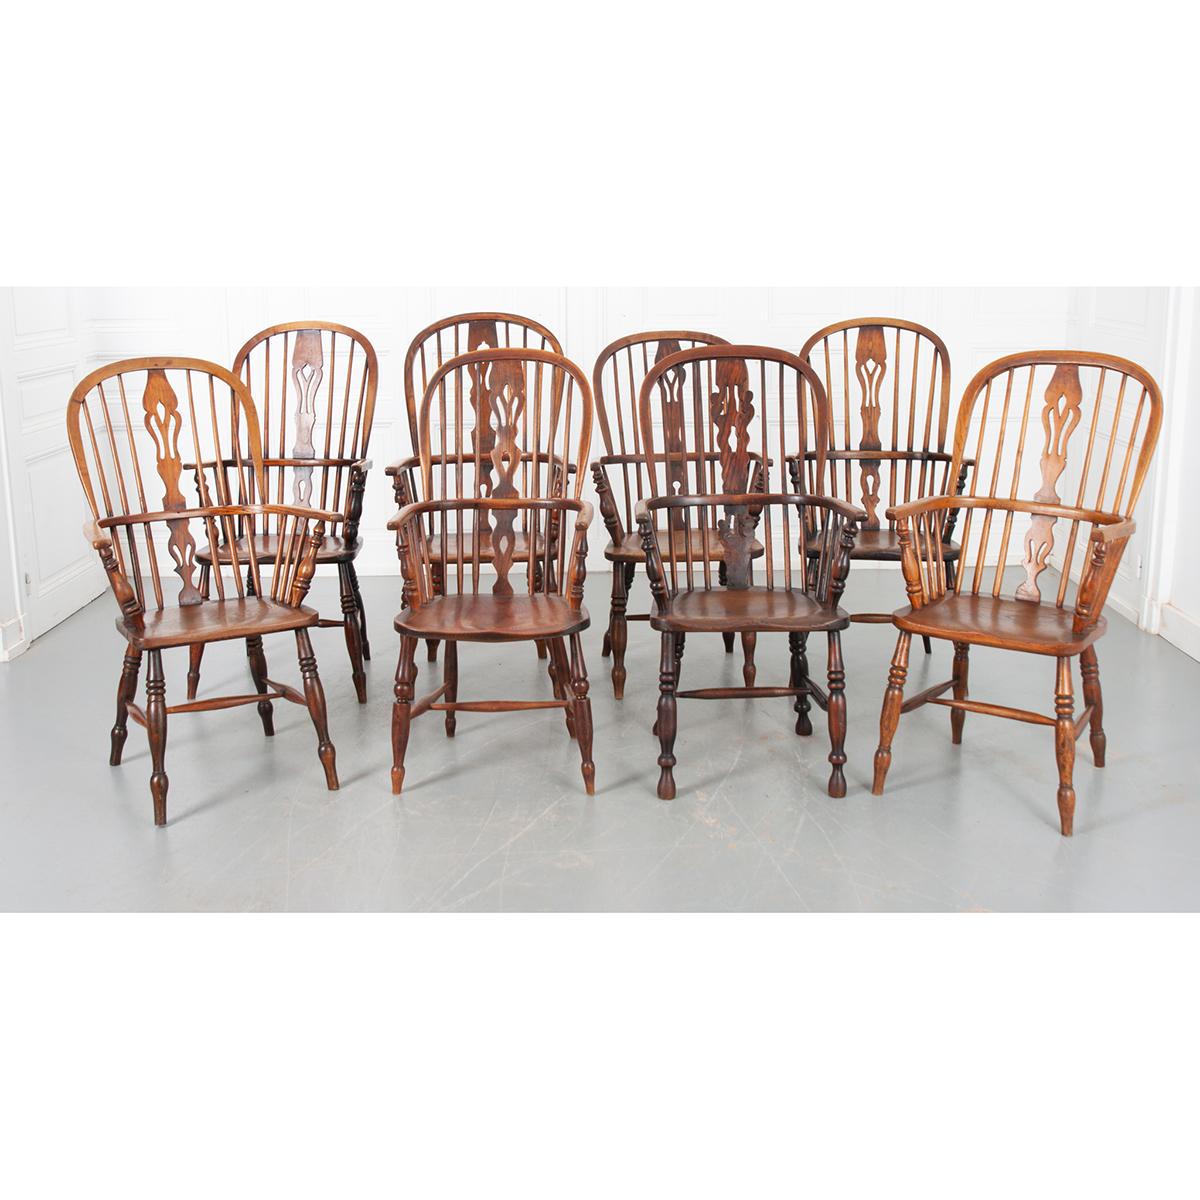 English 19th Century Set of 8 Oak Windsor Chairs For Sale 4